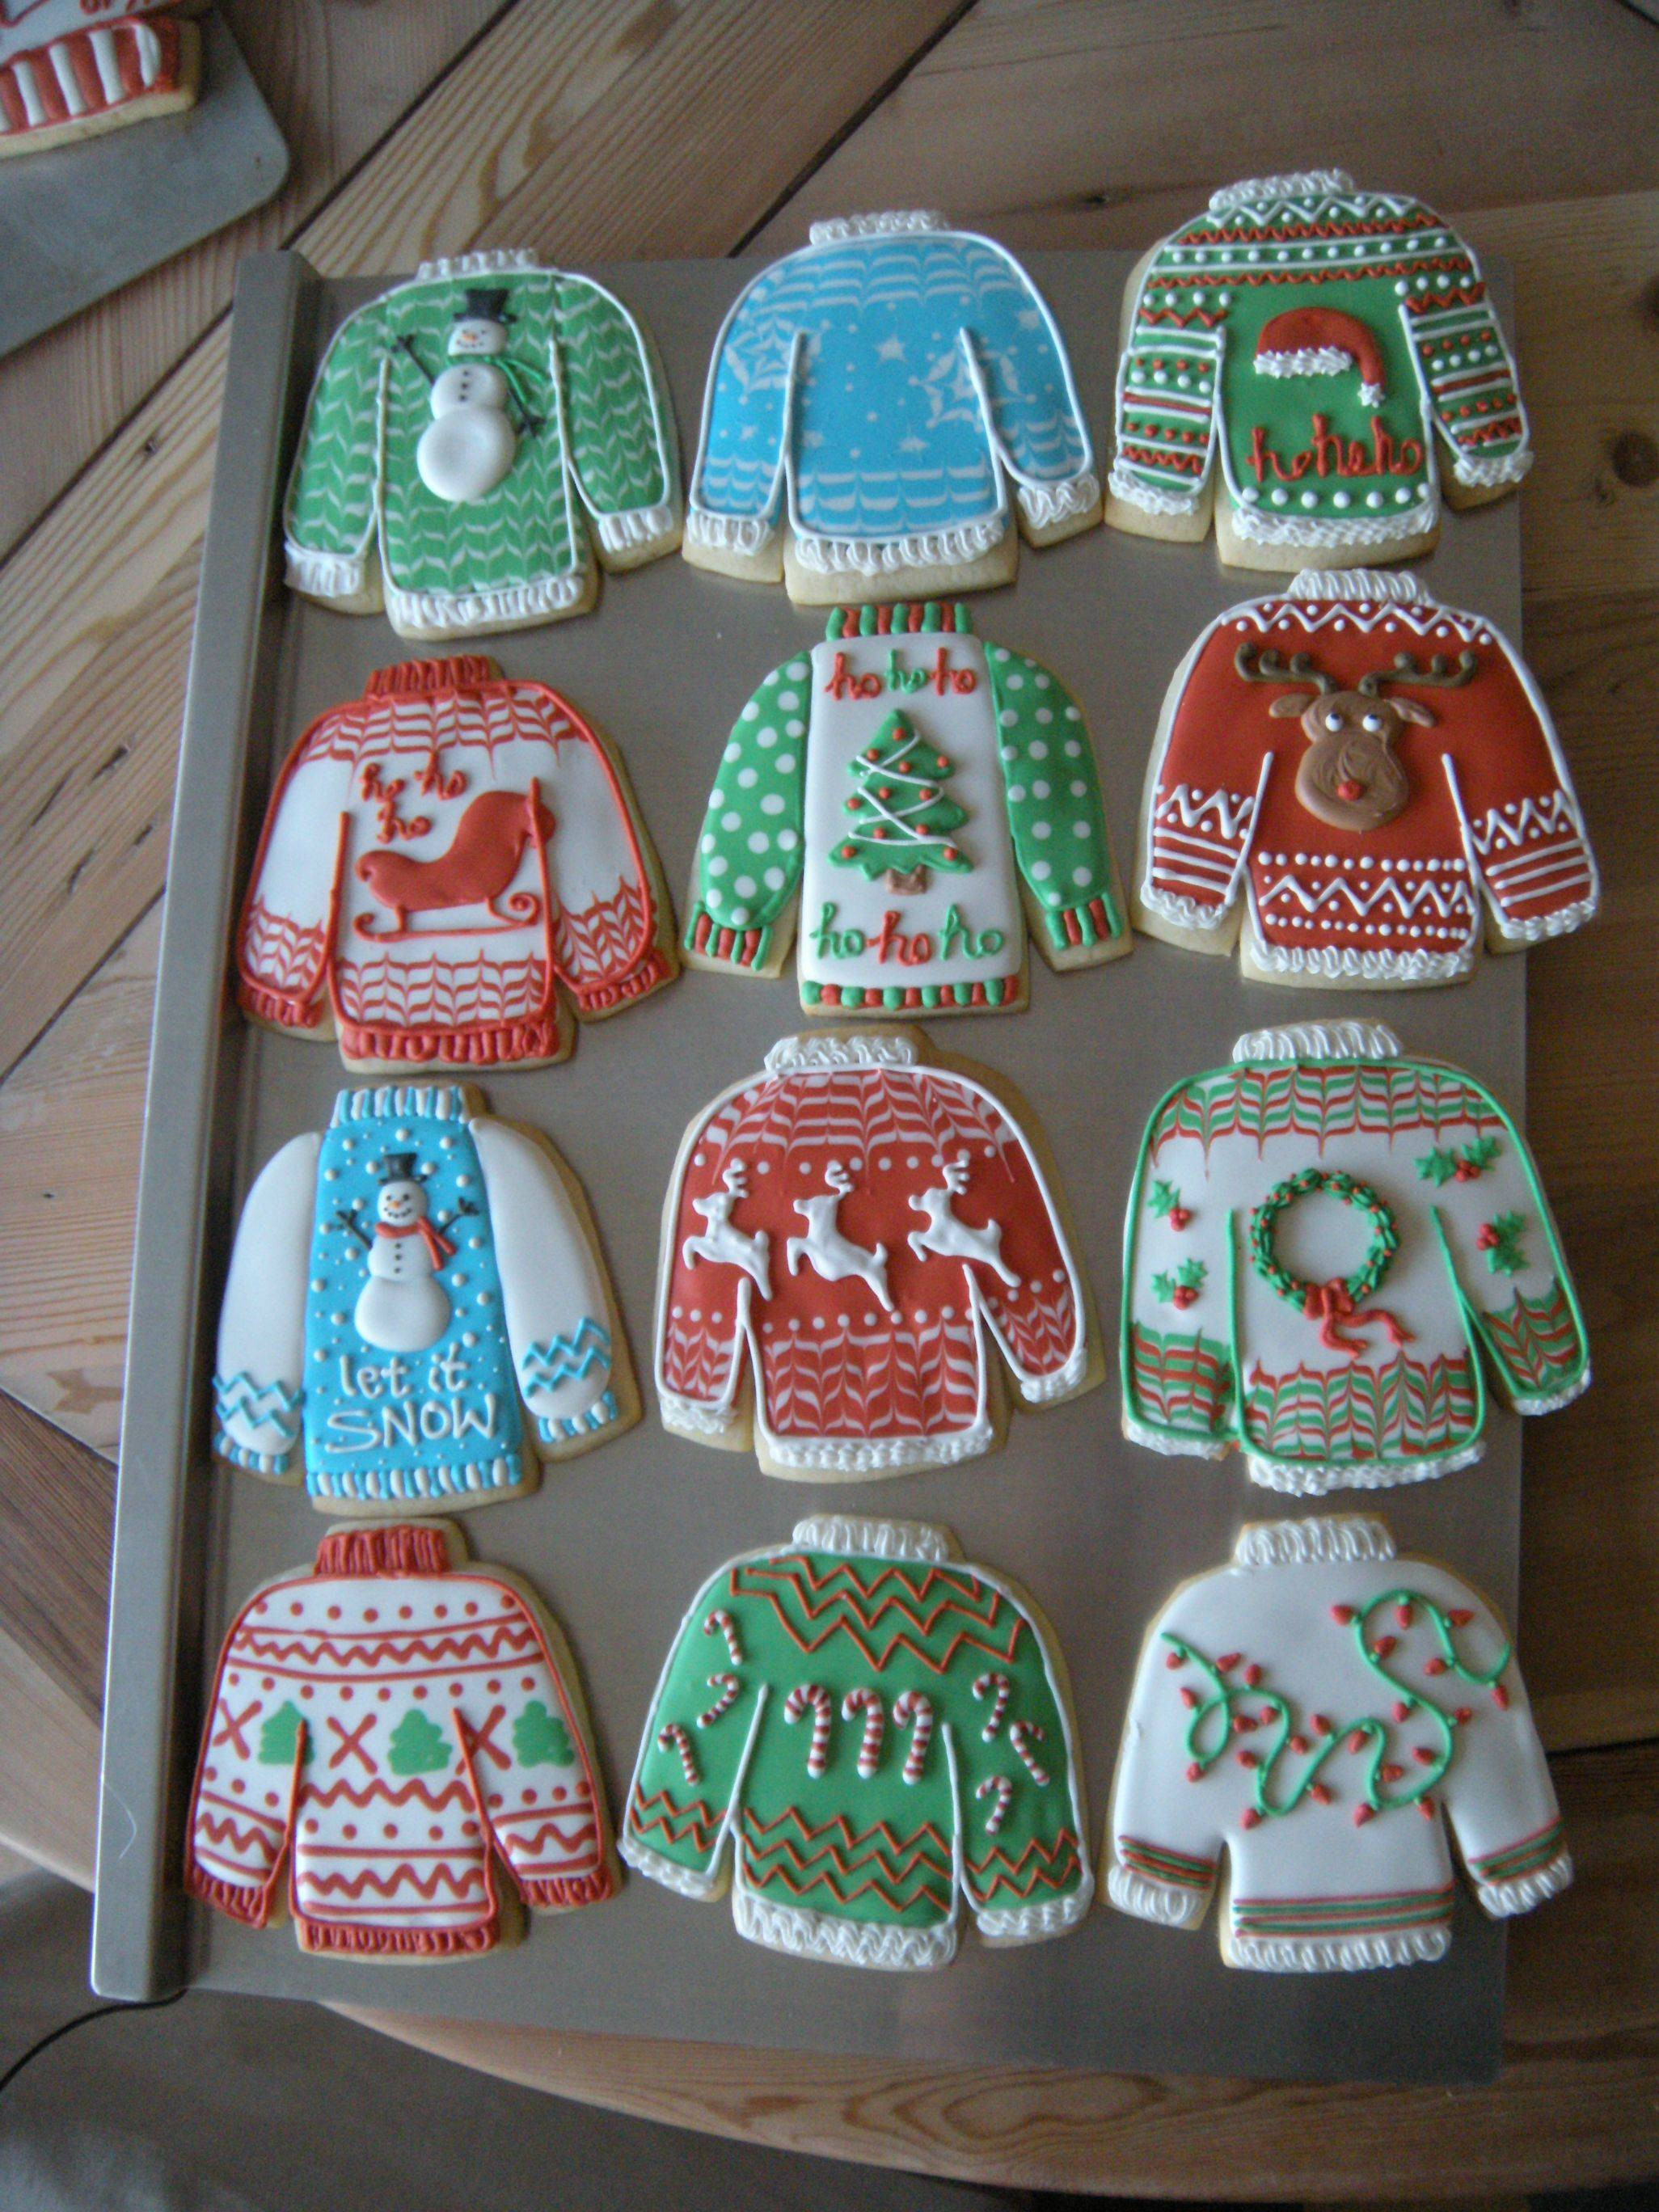 Ugly Christmas Sweater Cookies
 I decided to try some "ugly Christmas sweater" cookies